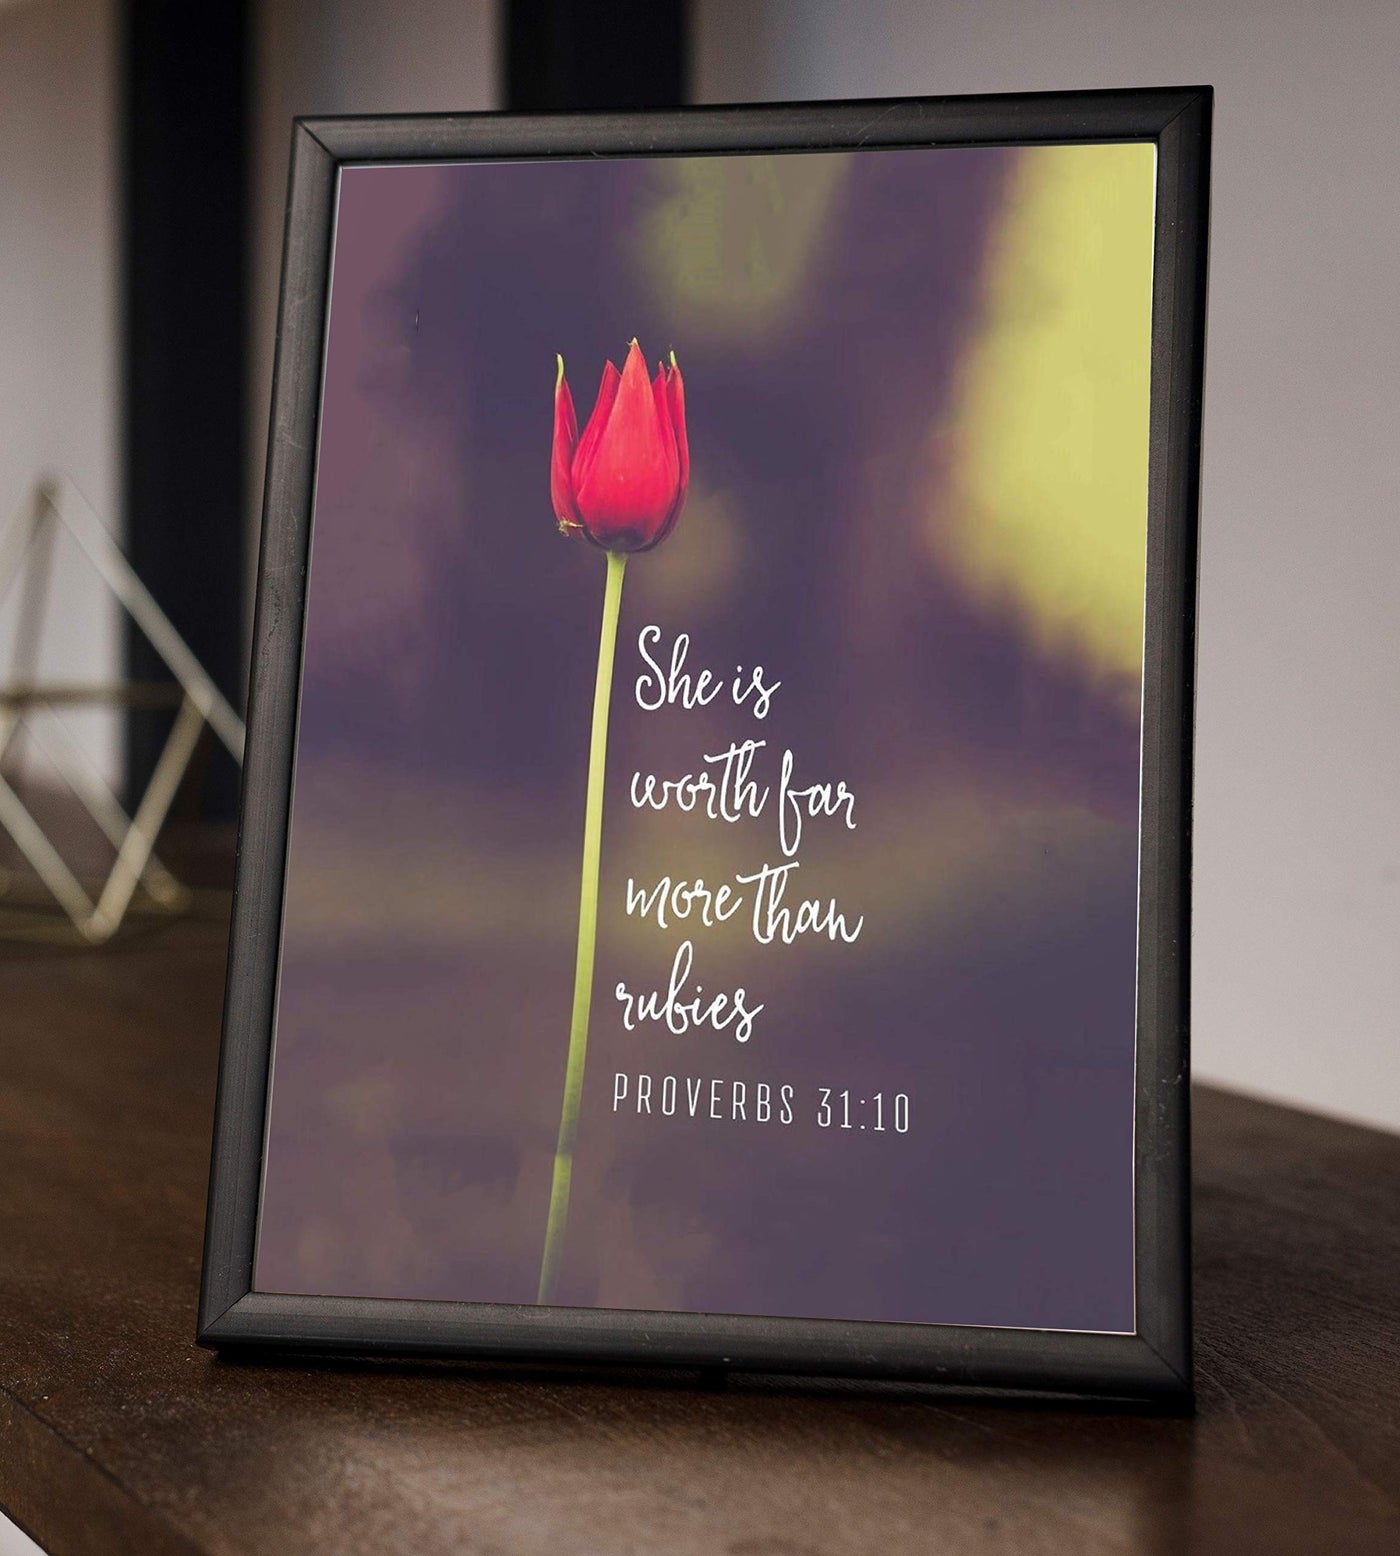 She Is Worth More Than Rubies- Proverbs 31:10 Bible Verse Wall Art- 8x10-Scripture Wall Print-Ready to Frame. Inspirational Home-Office-Church Decor. Perfect Christian Gift For That Special Woman.